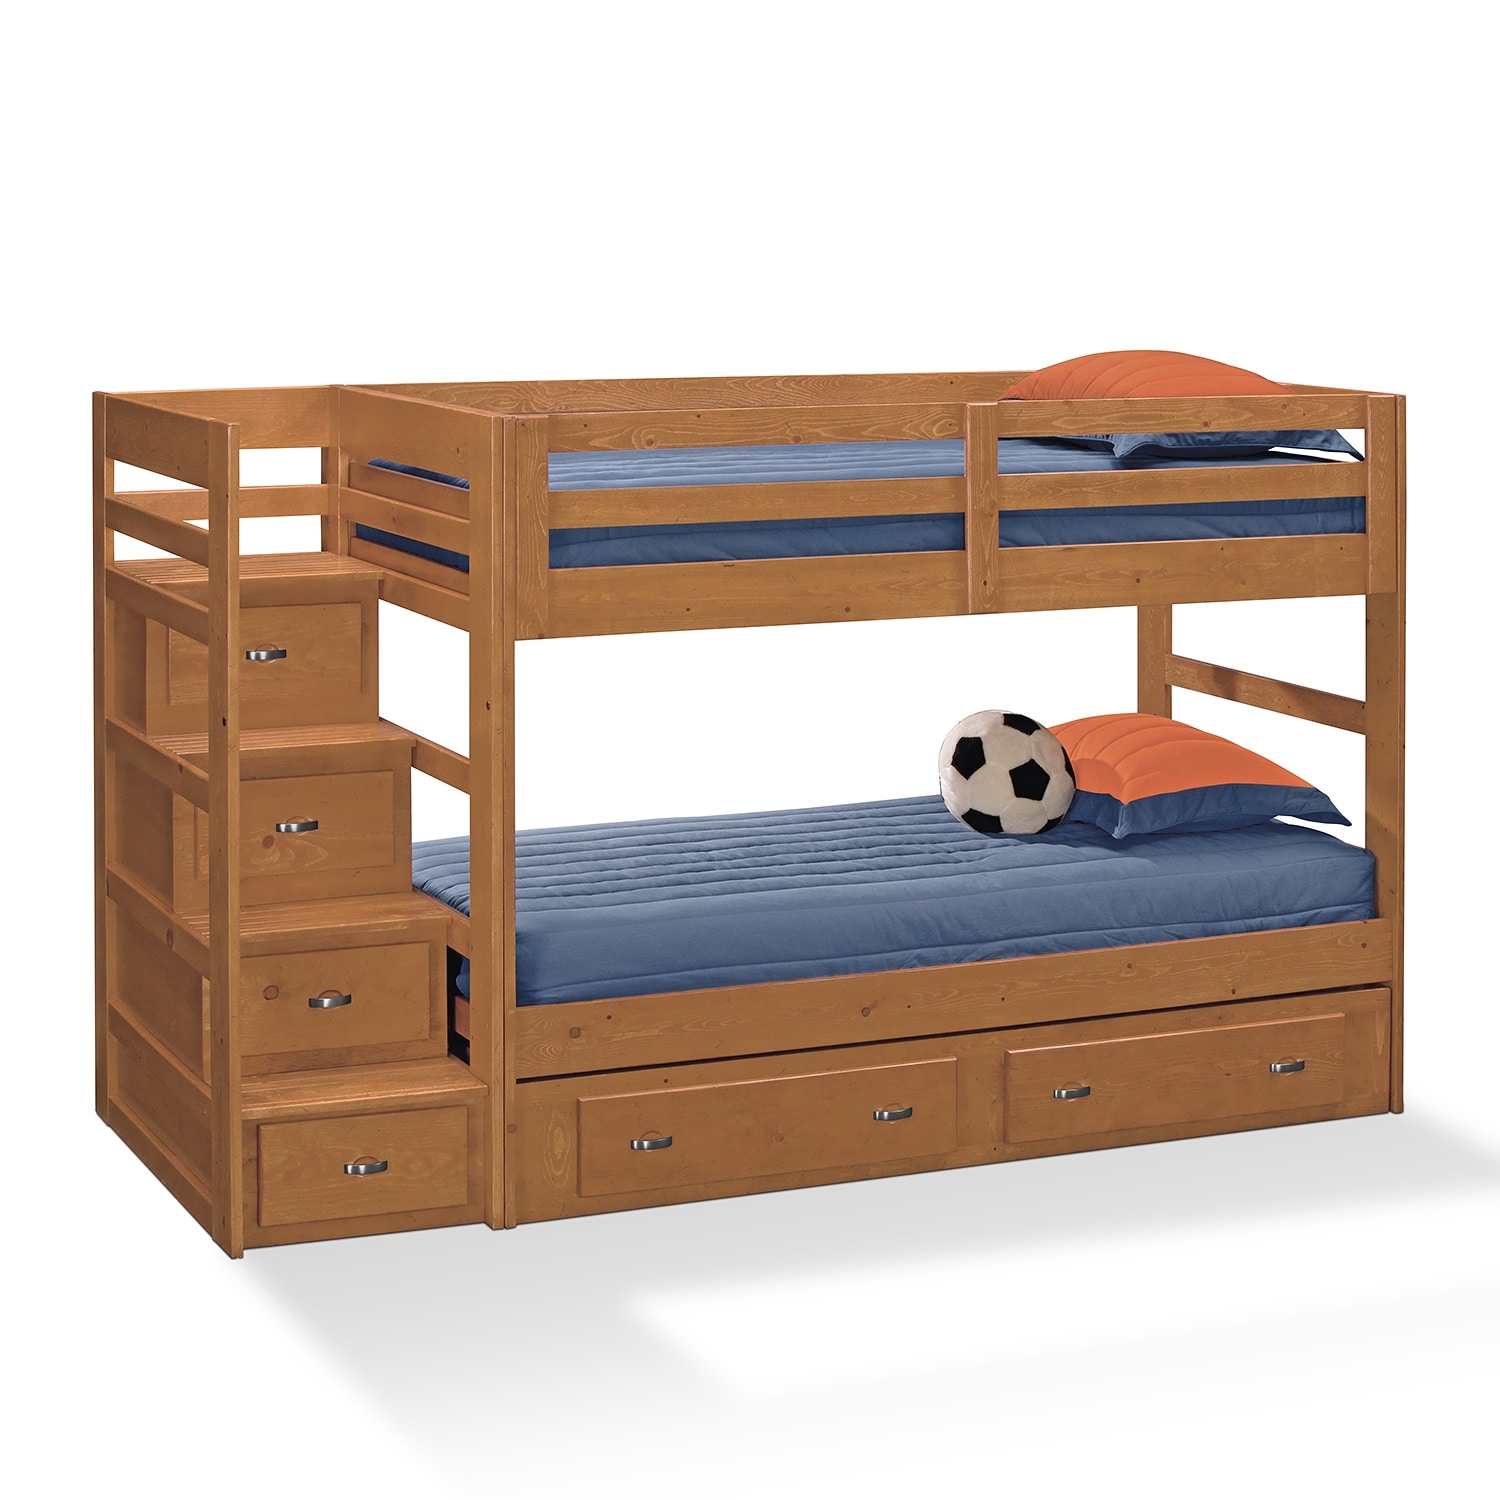 Bunk Beds With Stairs Interior Design, Pine Factory Bunk Beds